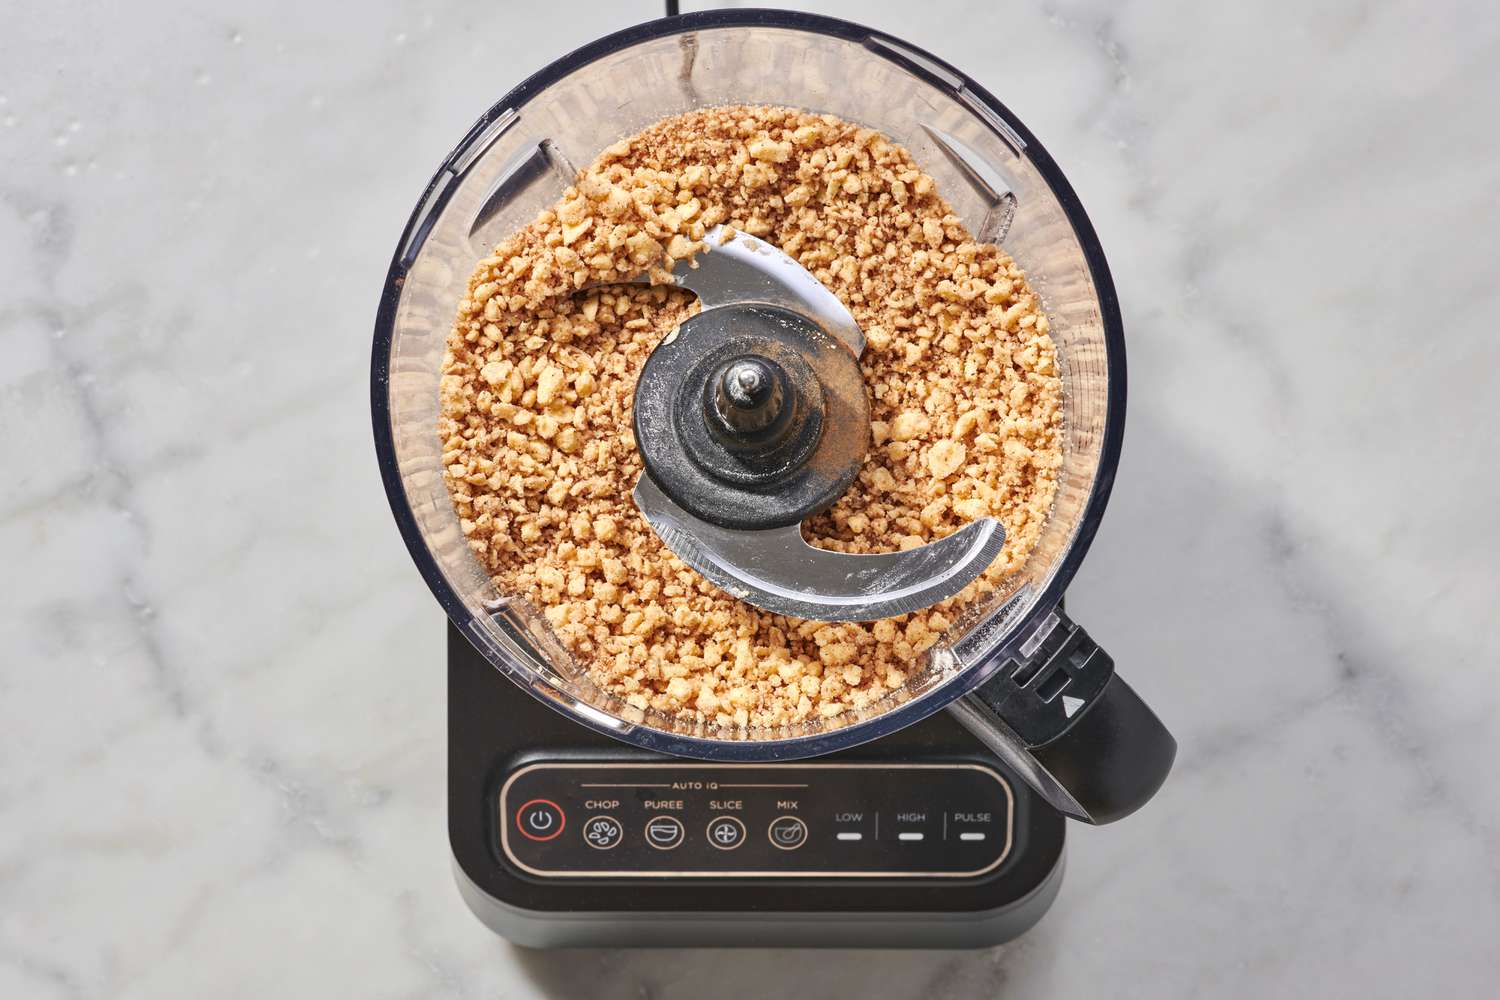 A food processor with coarse crumbs made from butter and the flour-brown sugar mixture